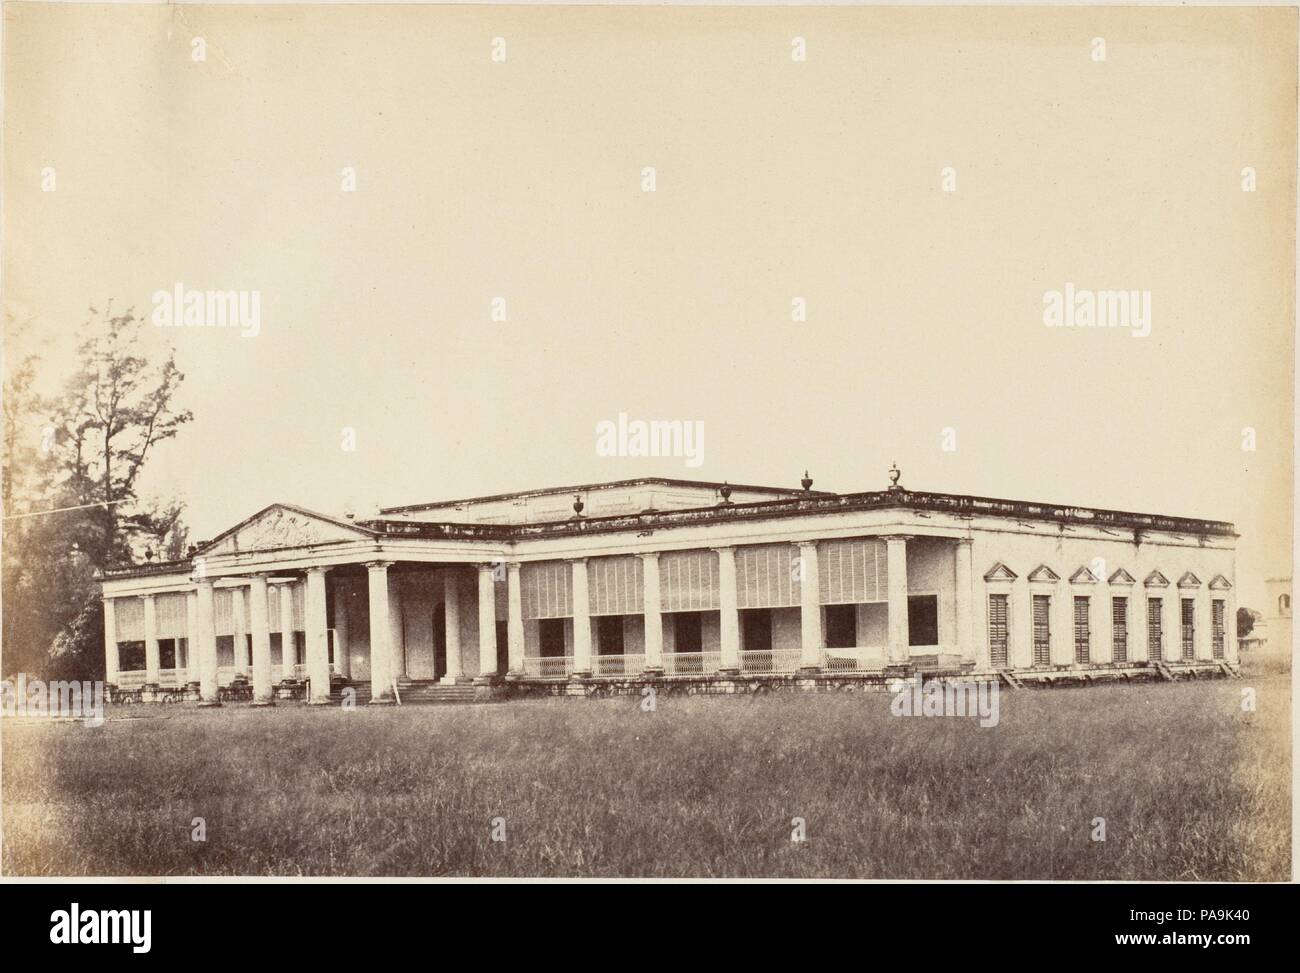 Outram Institute, Calcutta. Artiste : le capitaine R. B. Hill. Dimensions : Image : 16,8 x 24,7 cm (6 5/8 x 9 3/4 in.) Montage : 21 x 28,1 cm (8 1/4 x 11 1/16 in.). Date : 1850. Musée : Metropolitan Museum of Art, New York, USA. Banque D'Images